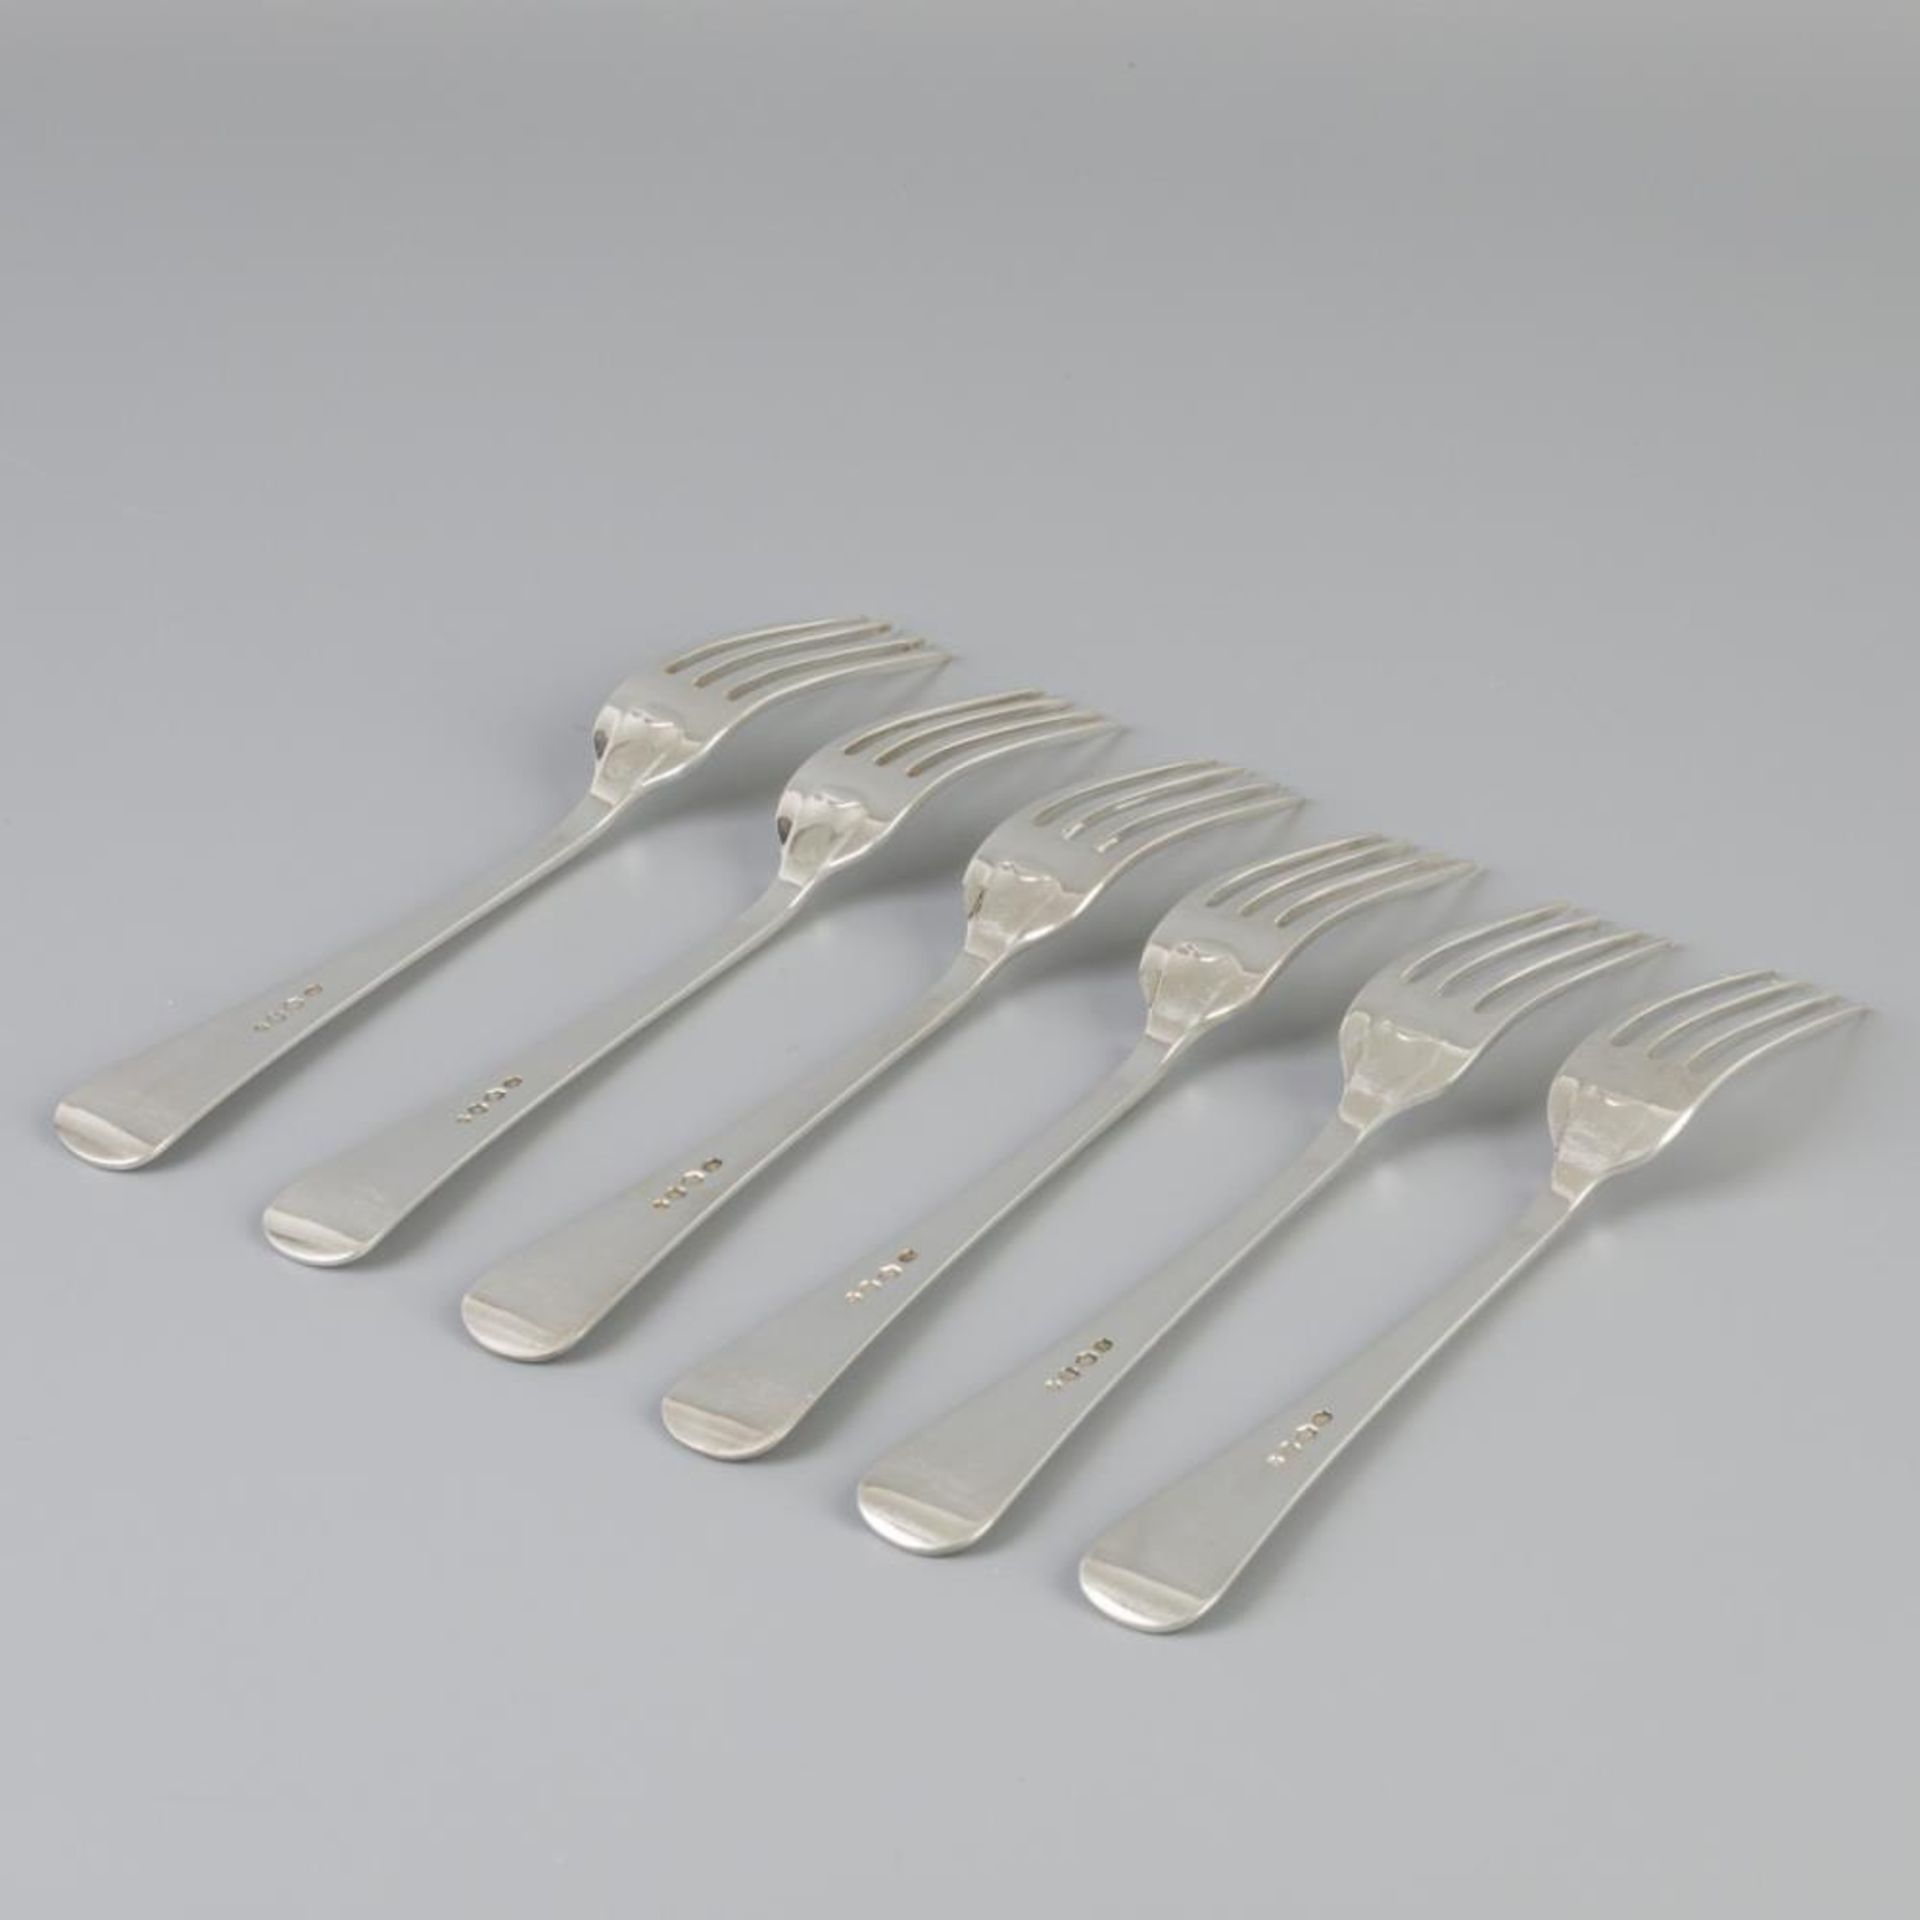 6 piece set dinner forks "Haags Lofje" silver. - Image 3 of 6